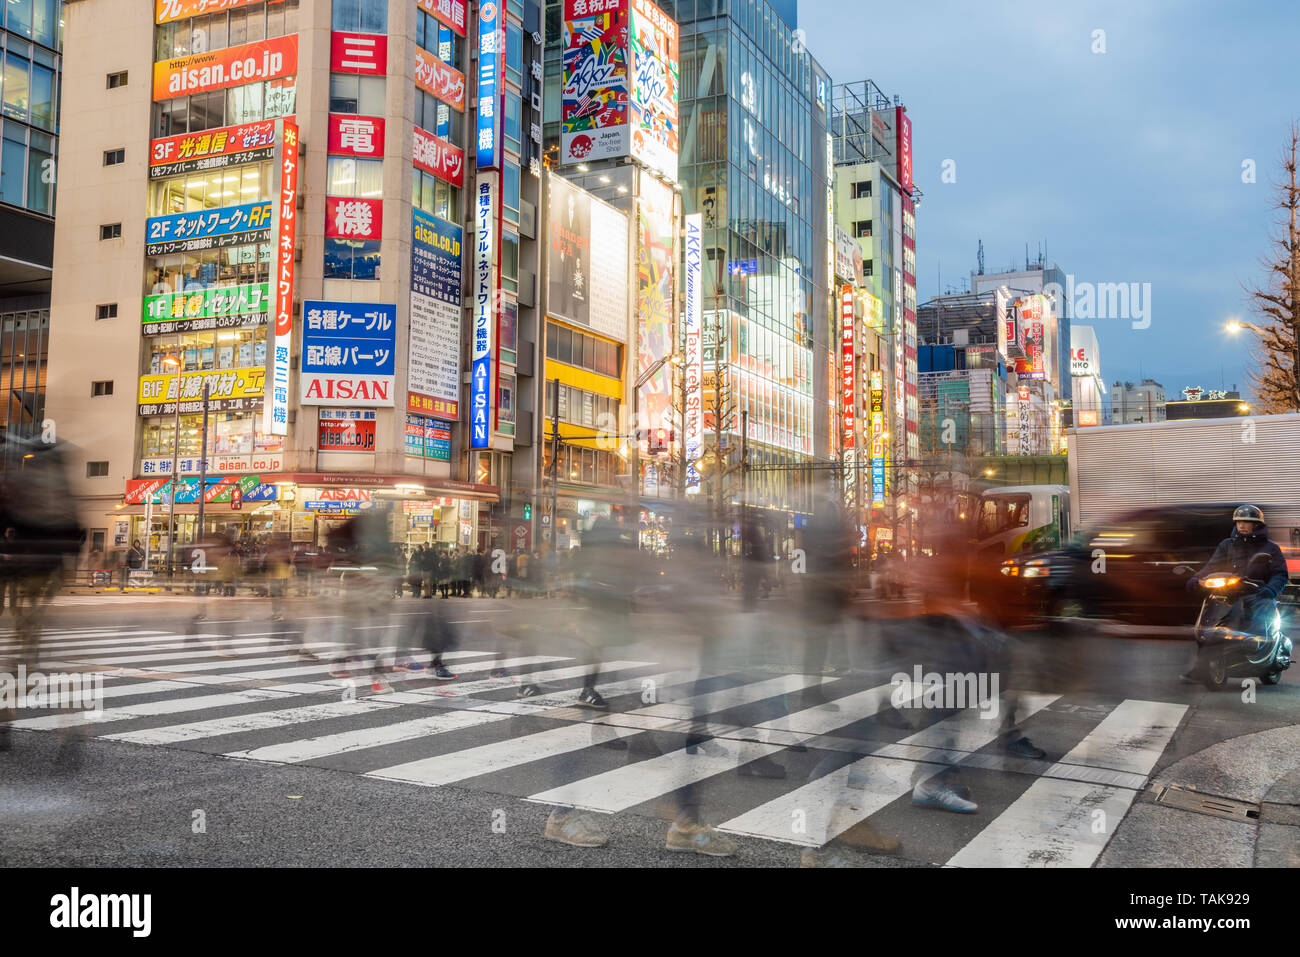 Tokyo, Japan - March 23, 2019: Photo of People crossing a street in Akihabara, a shopping district in central Tokyo famous for its electronics shops Stock Photo